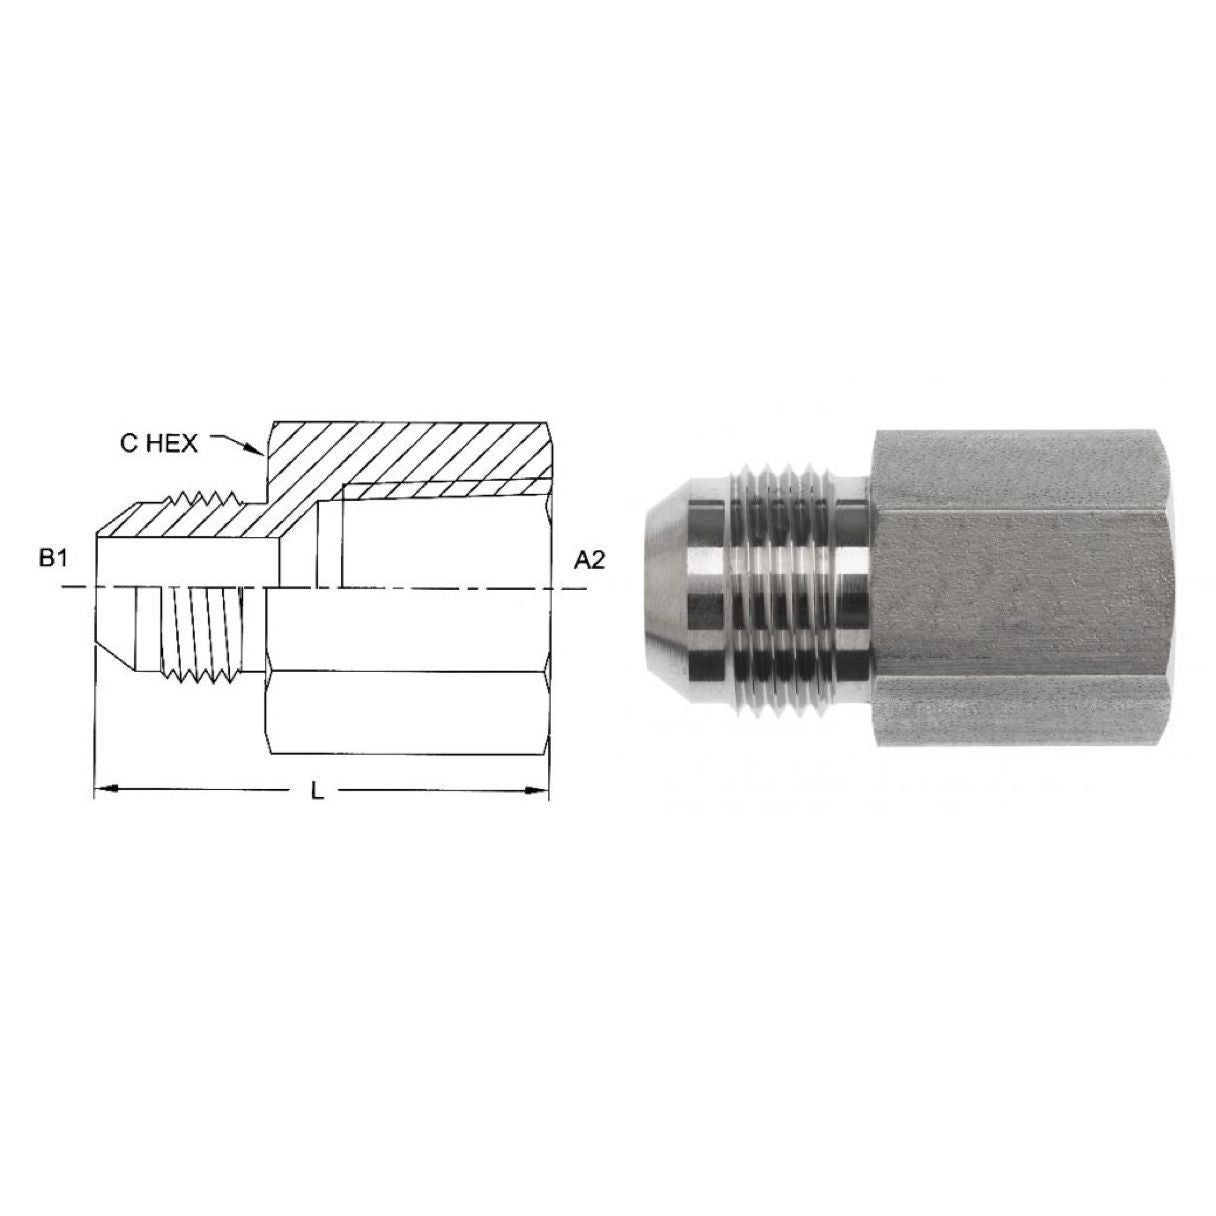 2405-32-24 : OneHydraulics  Adapter, Straight, 2" Male NPT x 1.5 (1-1/2") Female, Steel, 2000psi